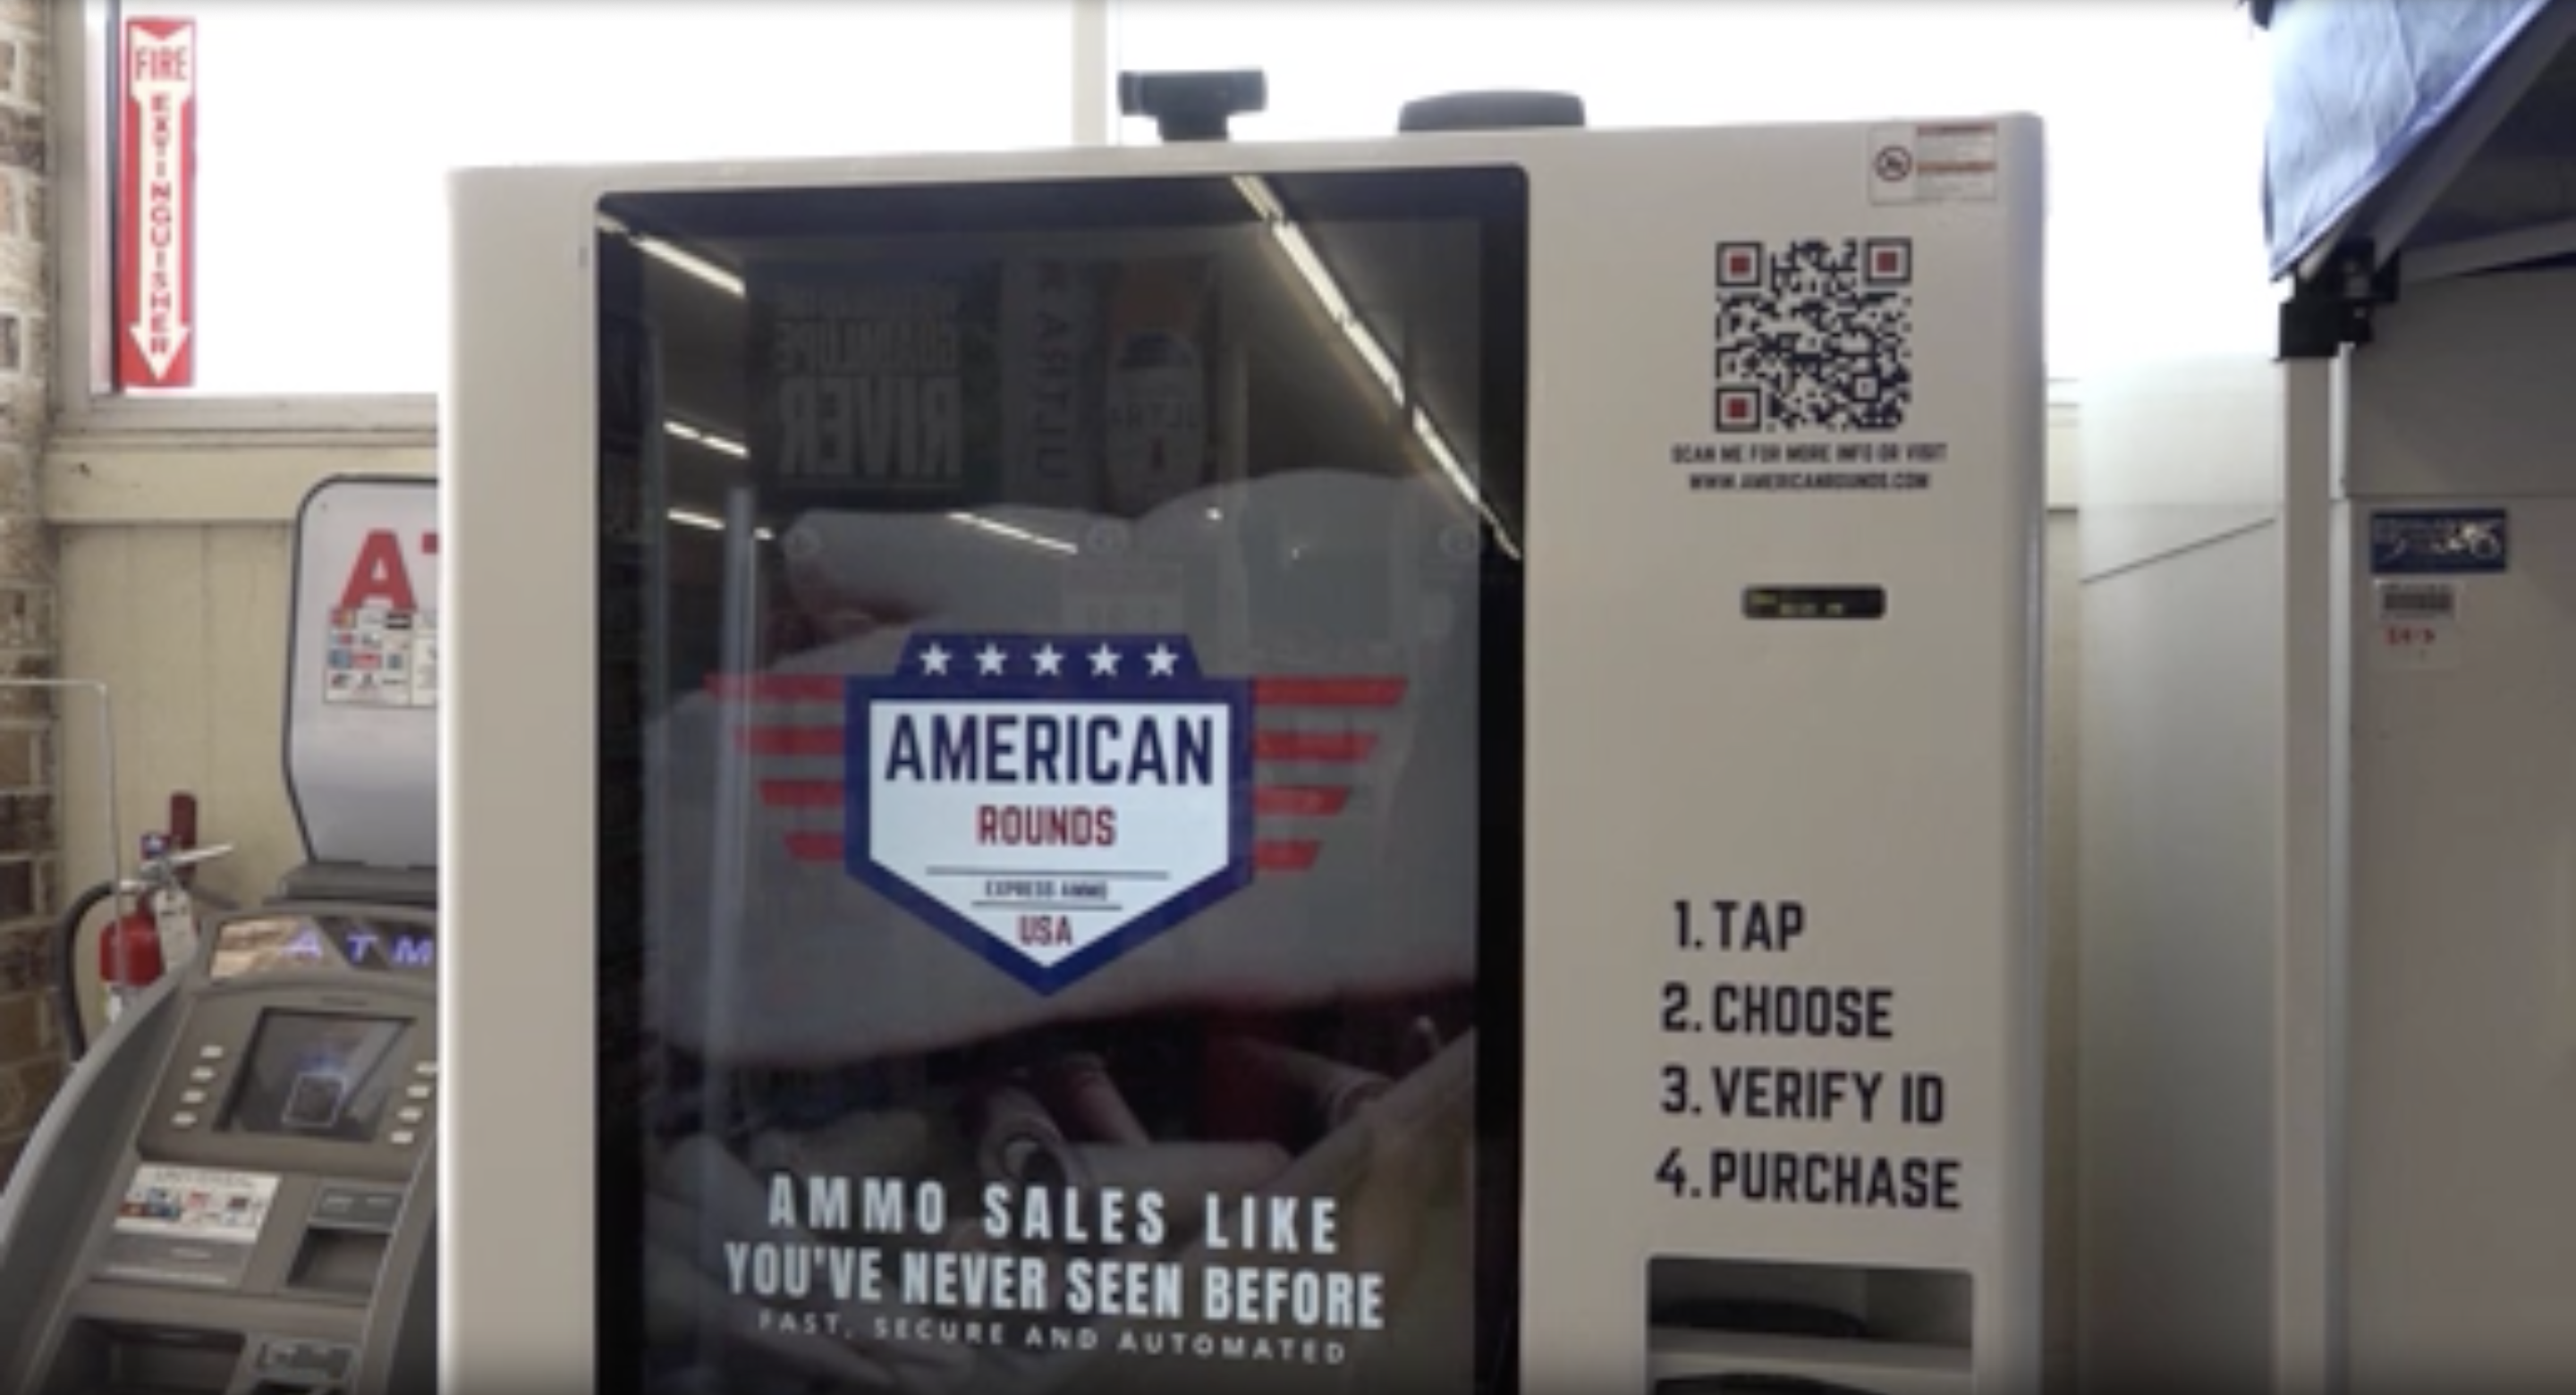 Ammo vending machines are being installed in U.S. grocery stores